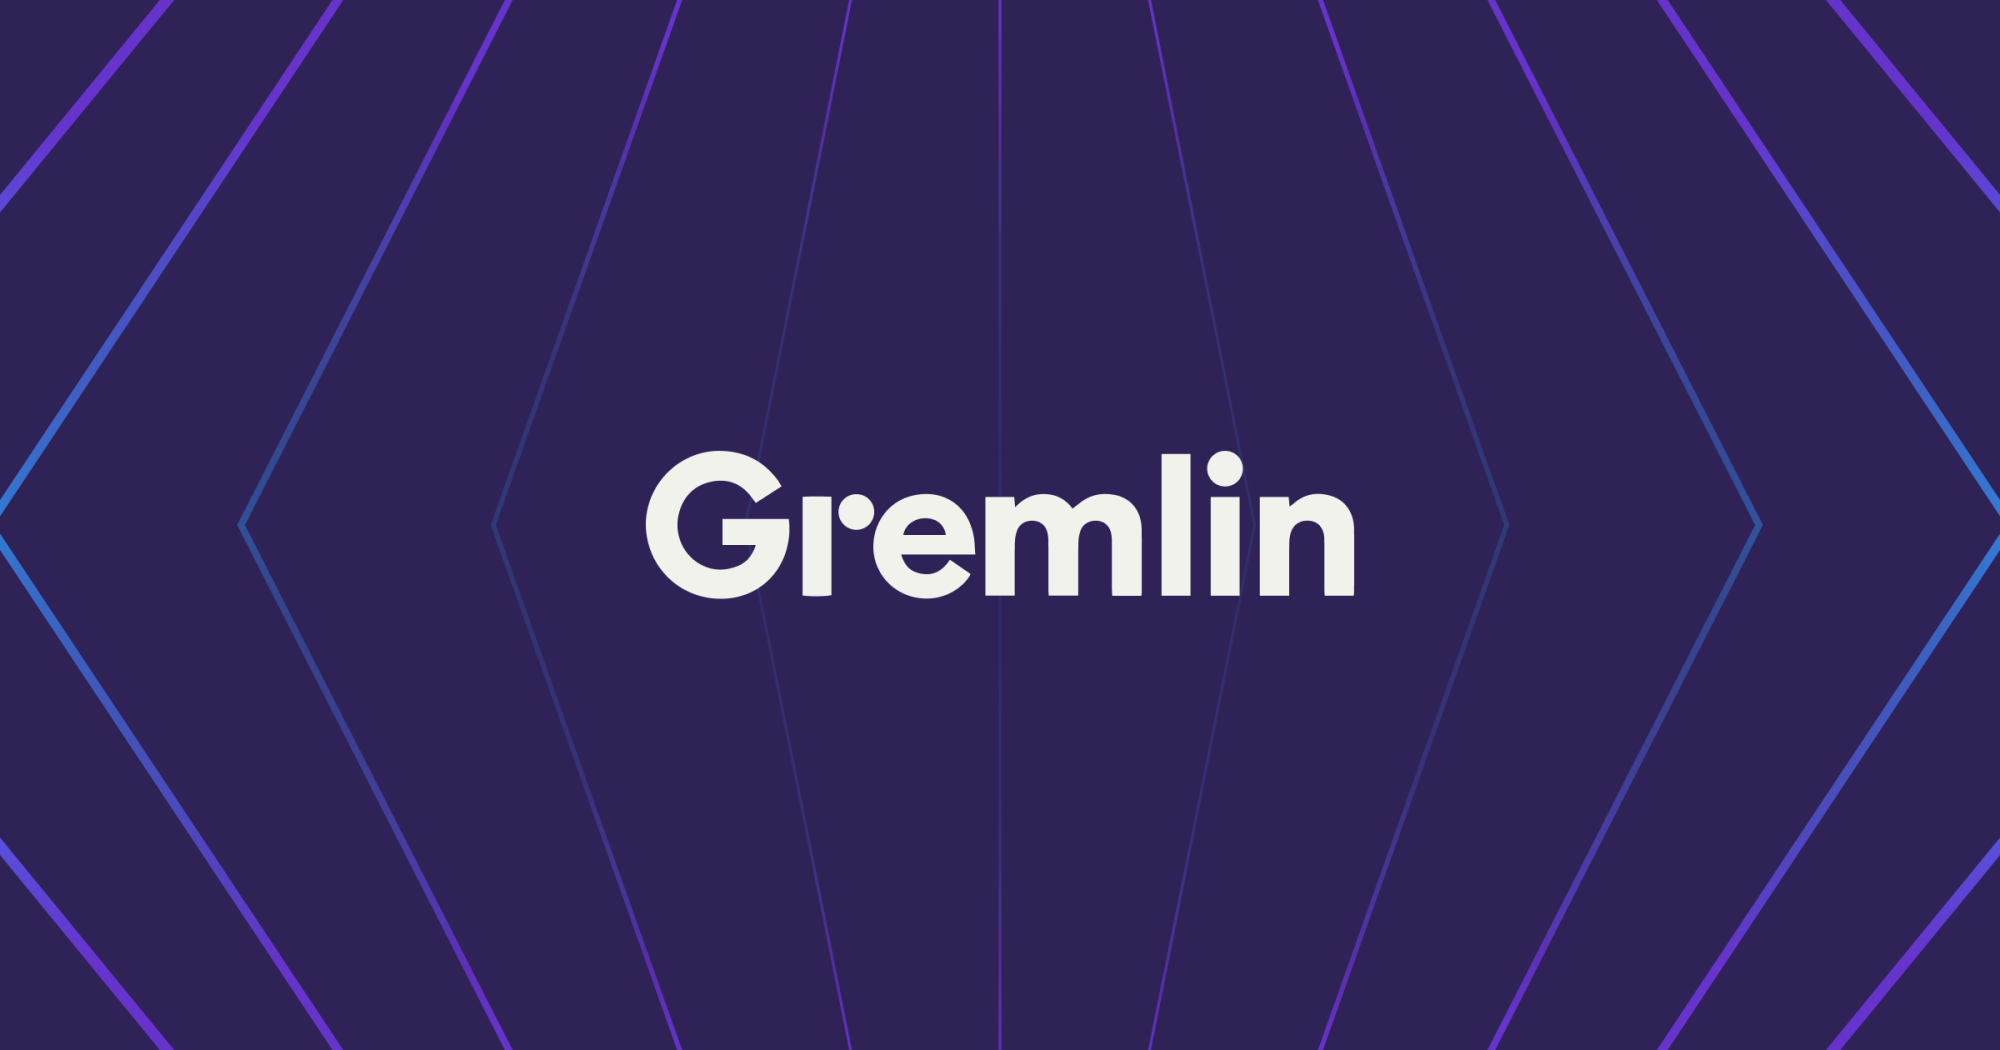 How to Install and Use Gremlin on Fedora